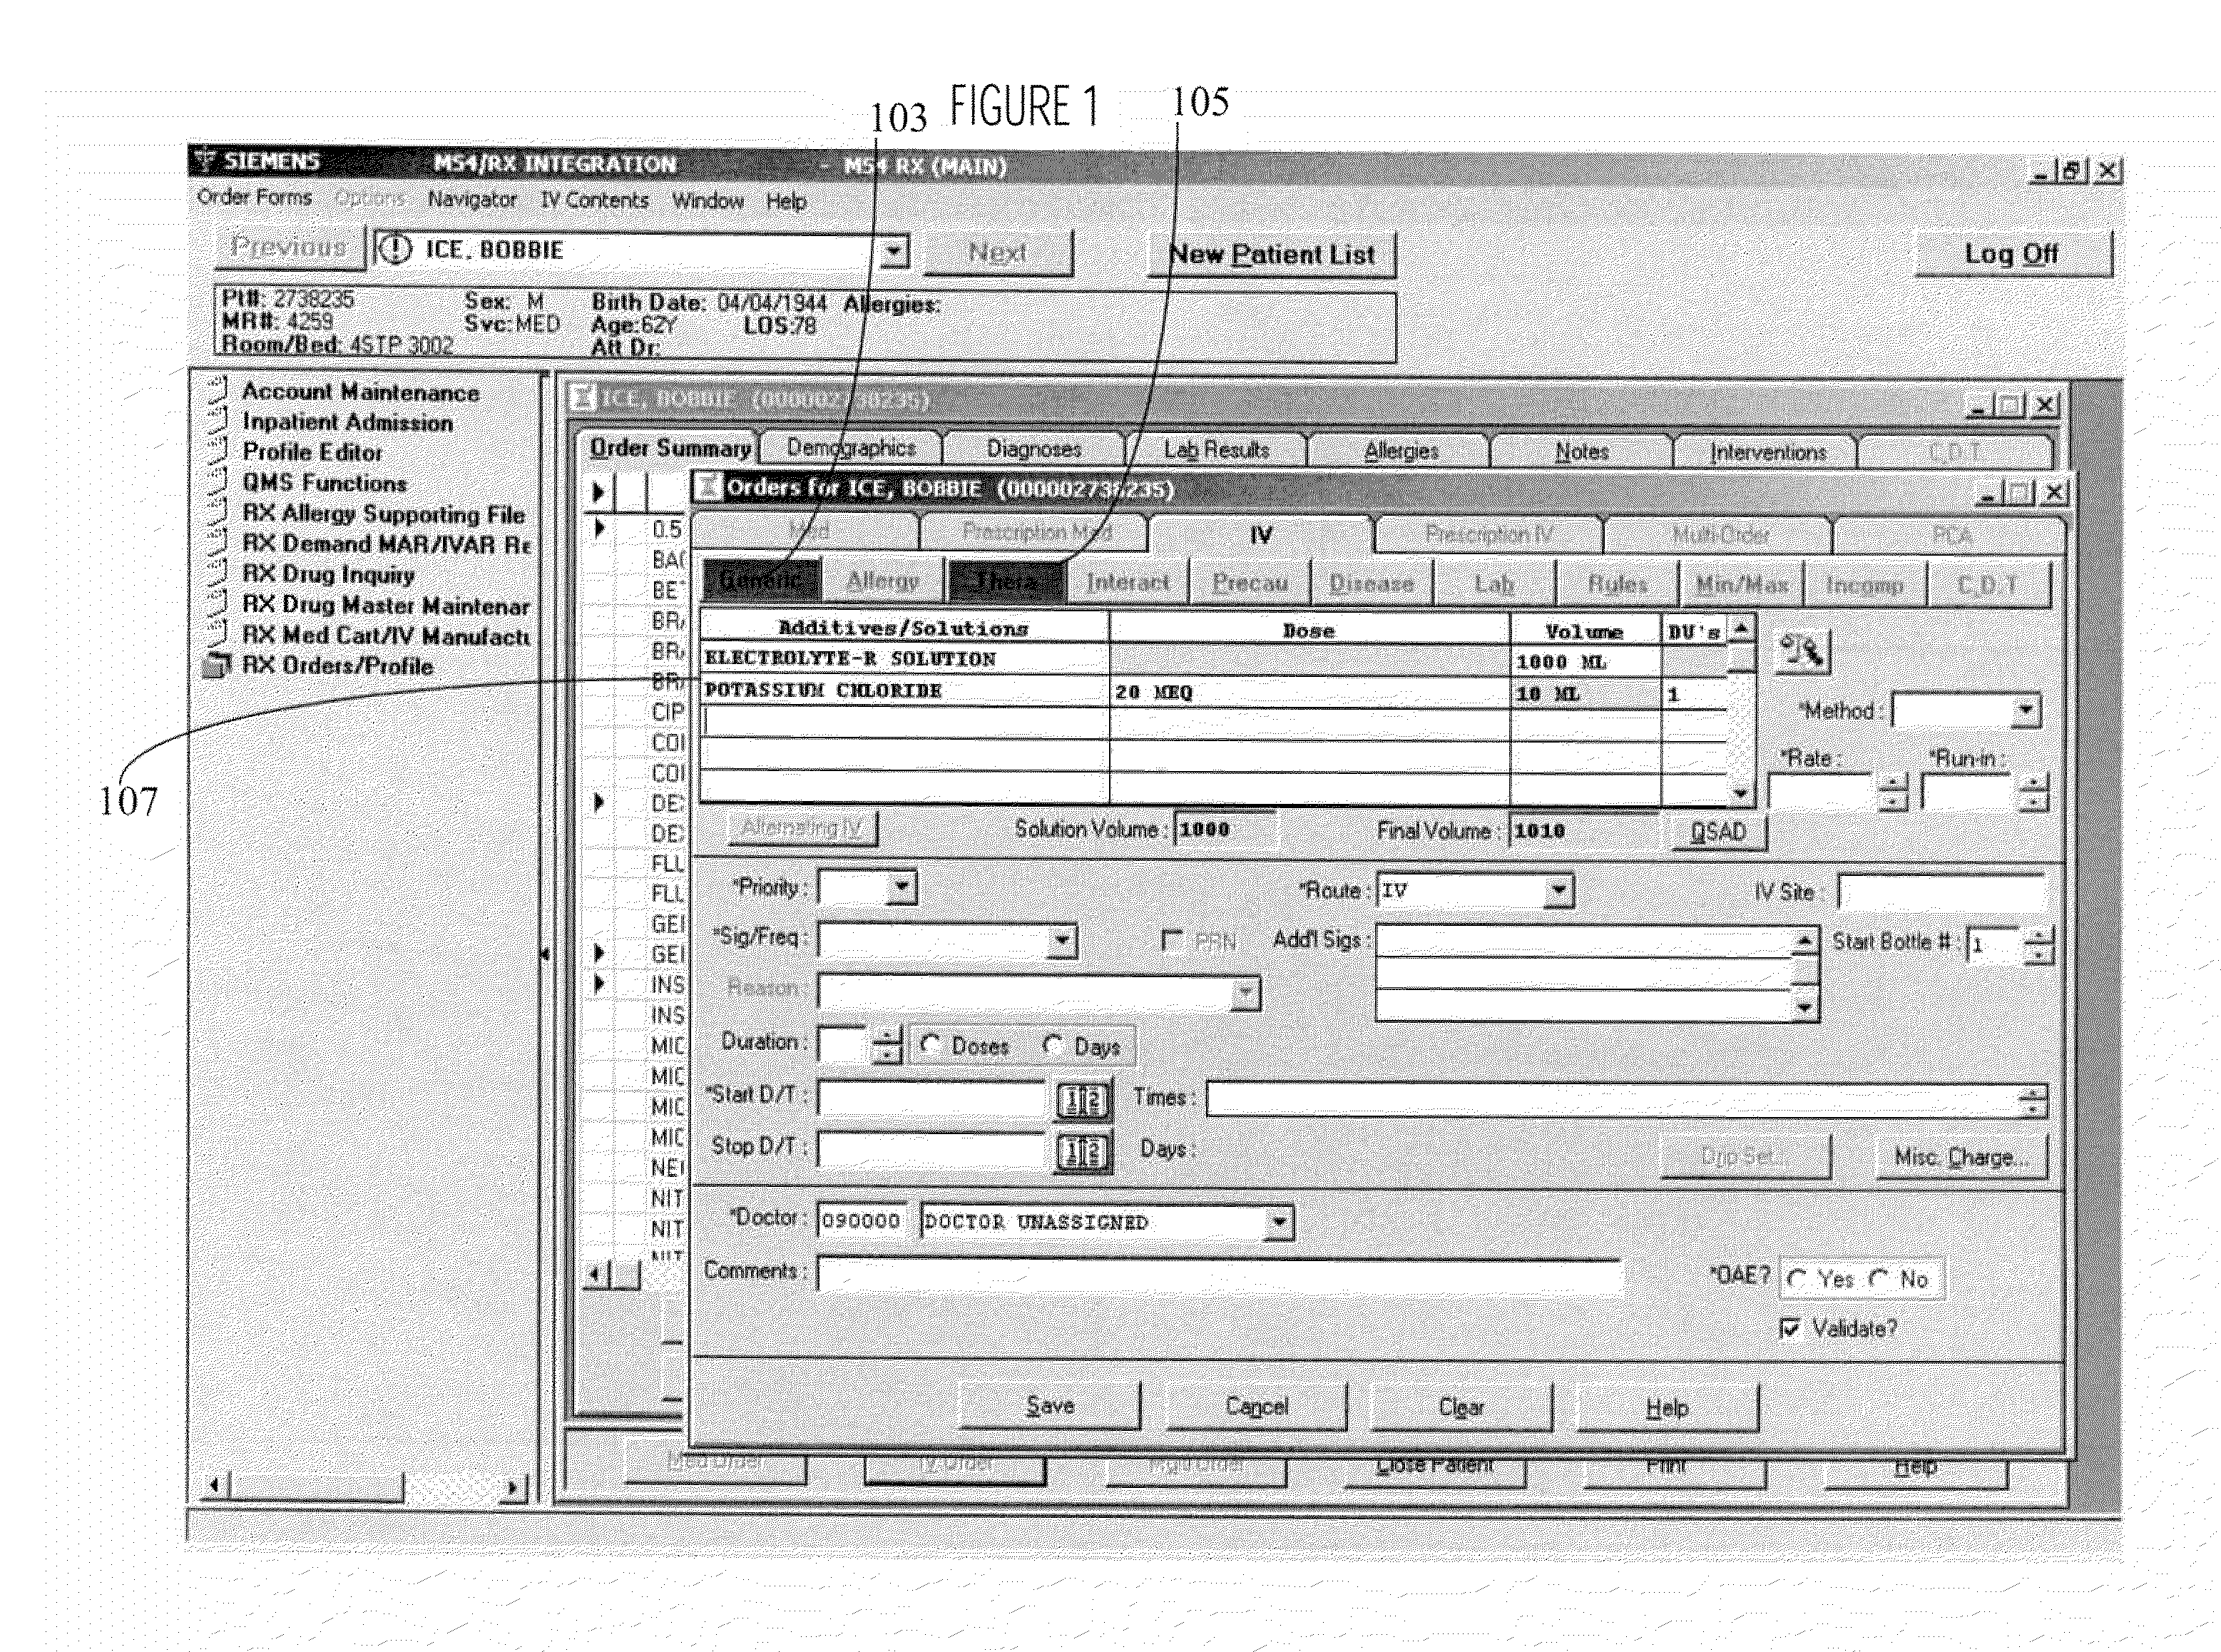 Computerized Treatment Order and Associated Alert Processing System